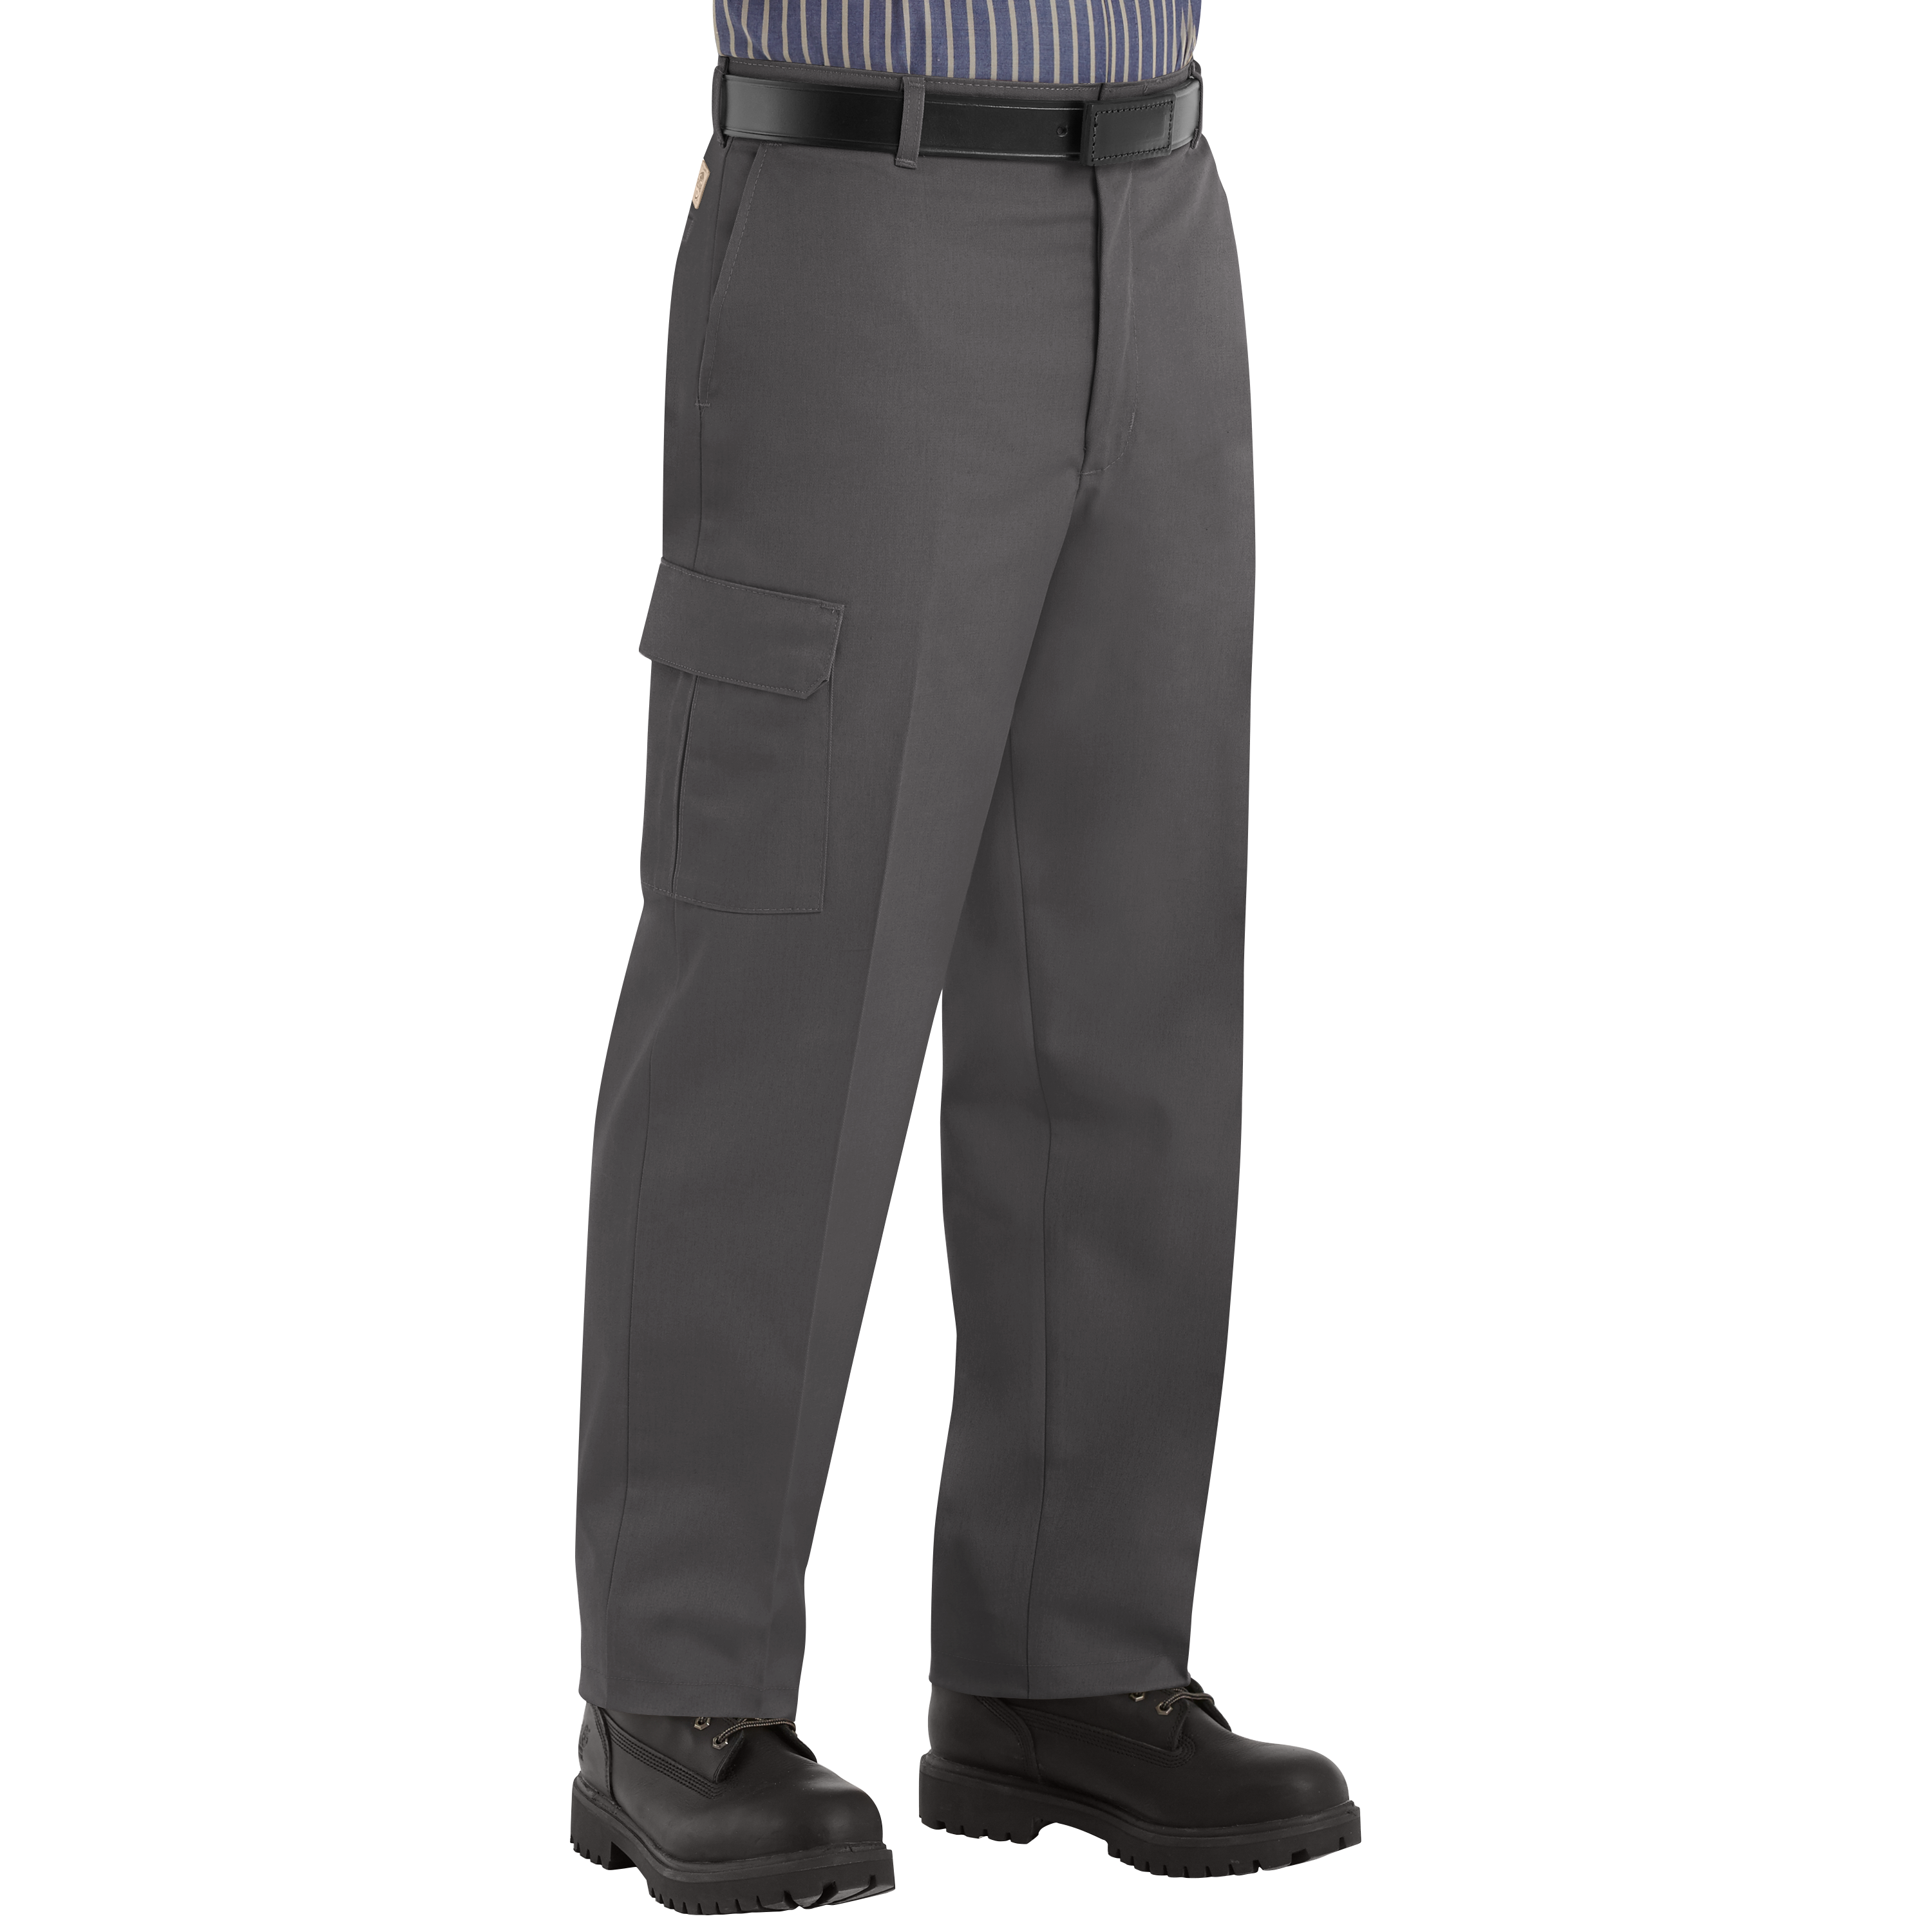 Professional Strong Heavy Duty Cargo Work Trousers Graphite Grey Black 